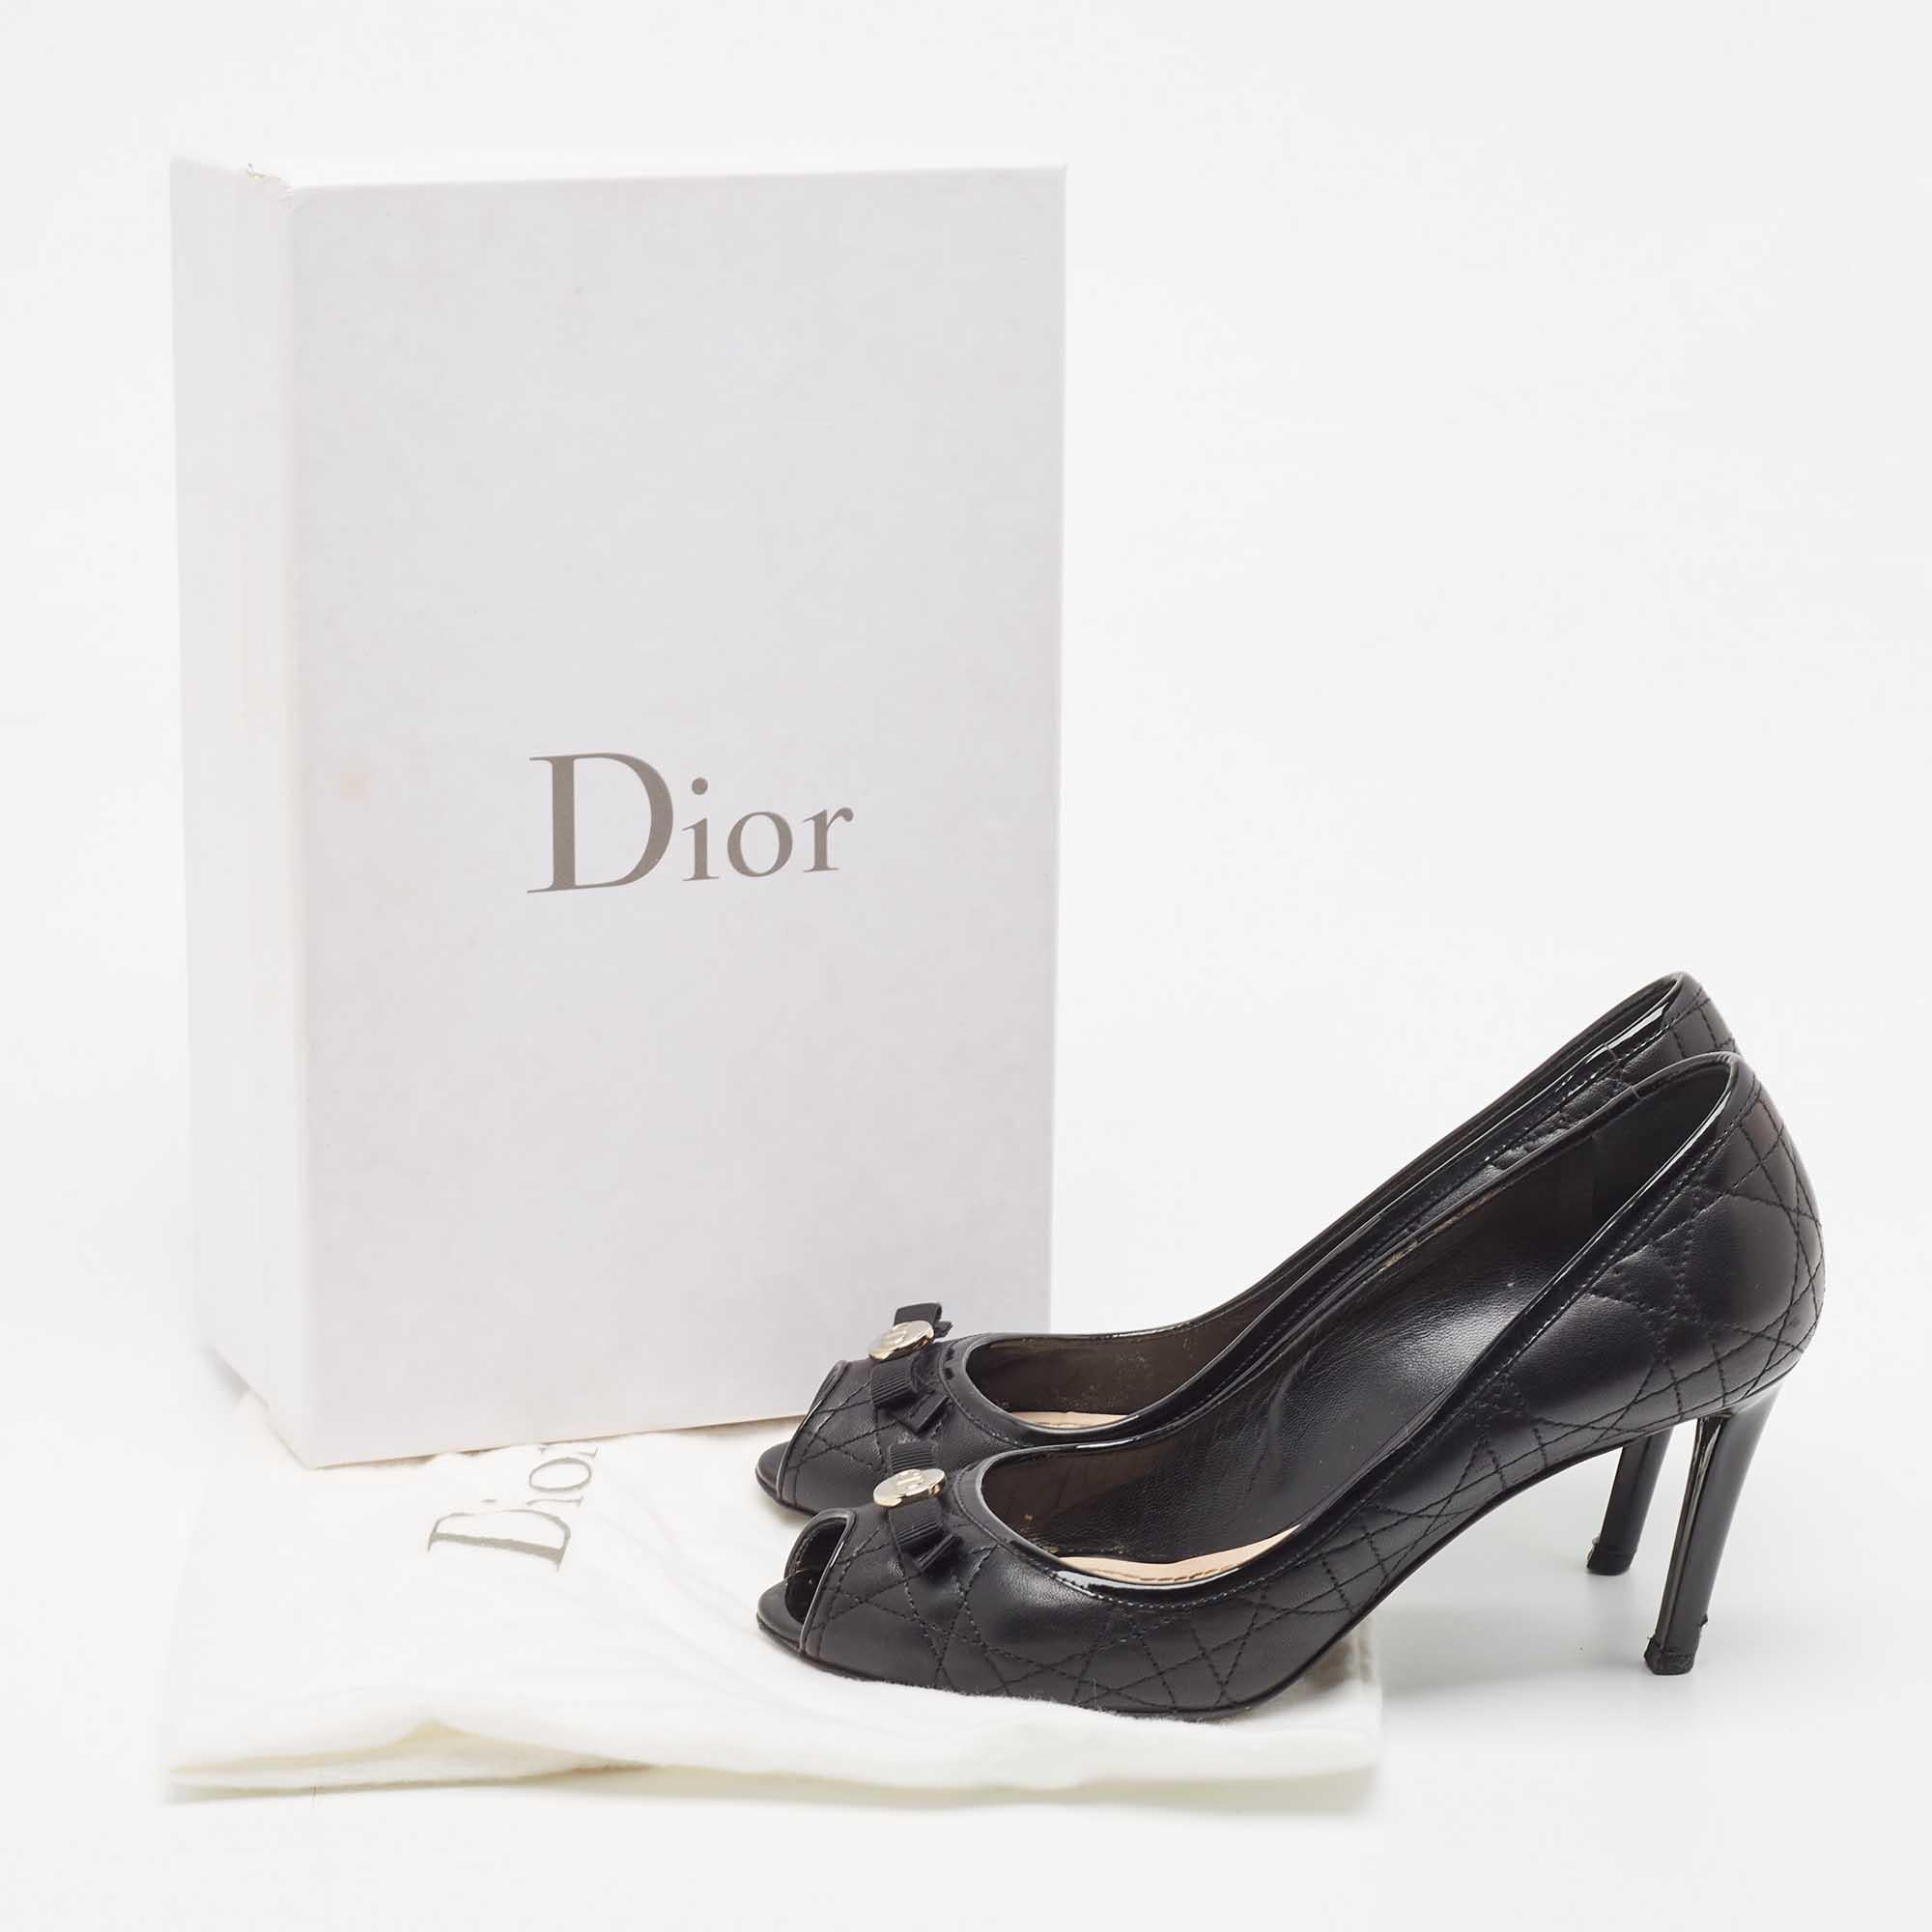 Dior Black Leather and Patent Peep Toe Pumps Size 38 For Sale 4